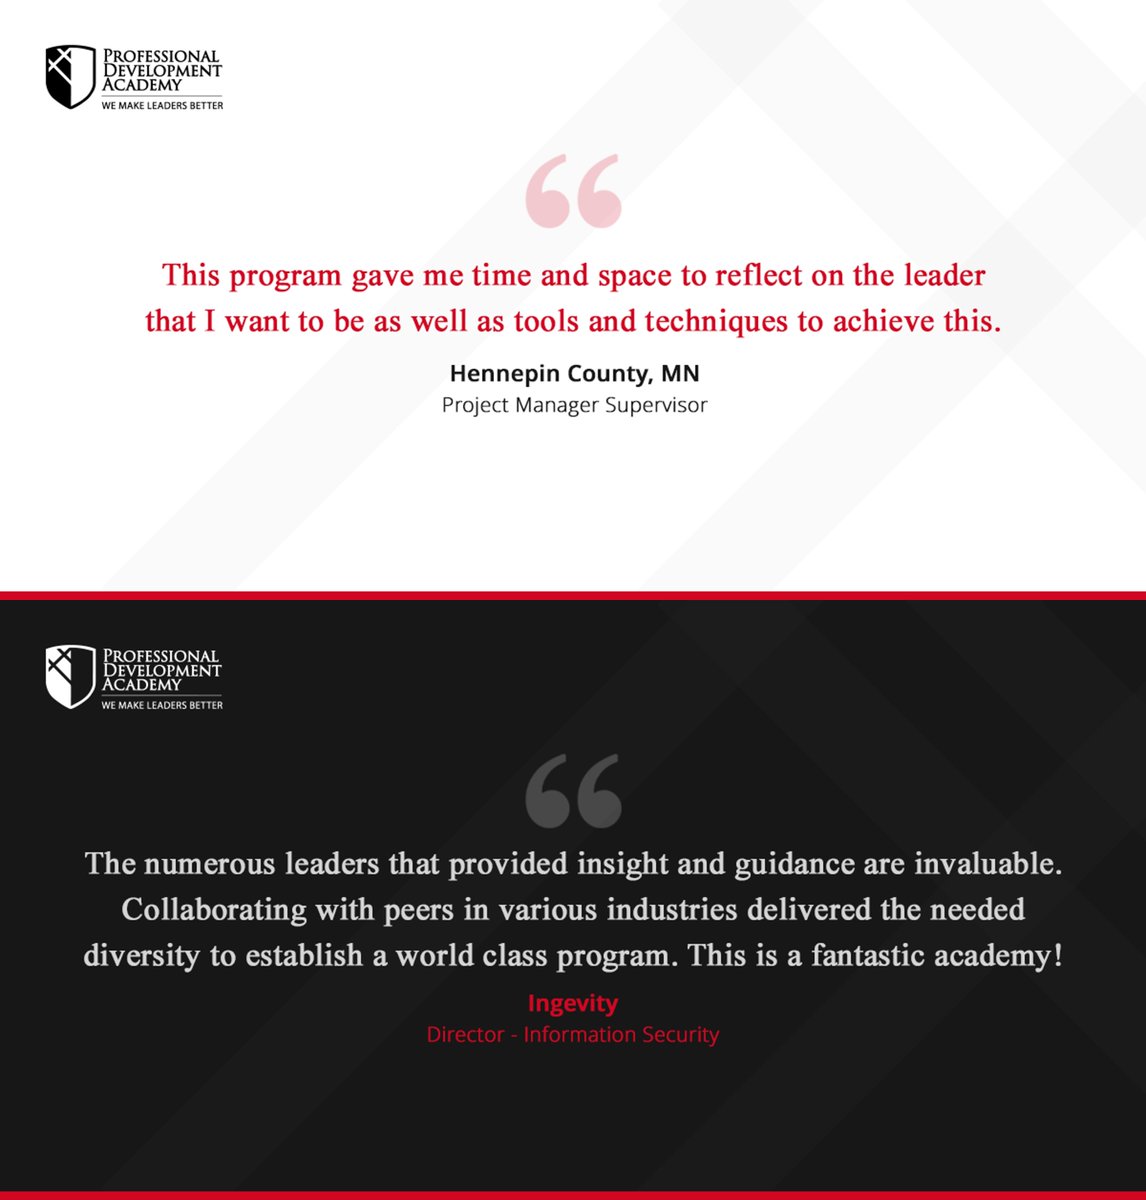 Today we graduate 800 participants from over 320 organizations. Check out what recent graduates have to say about the program. Congratulations to all our Graduates!! #leadershipdevelopment